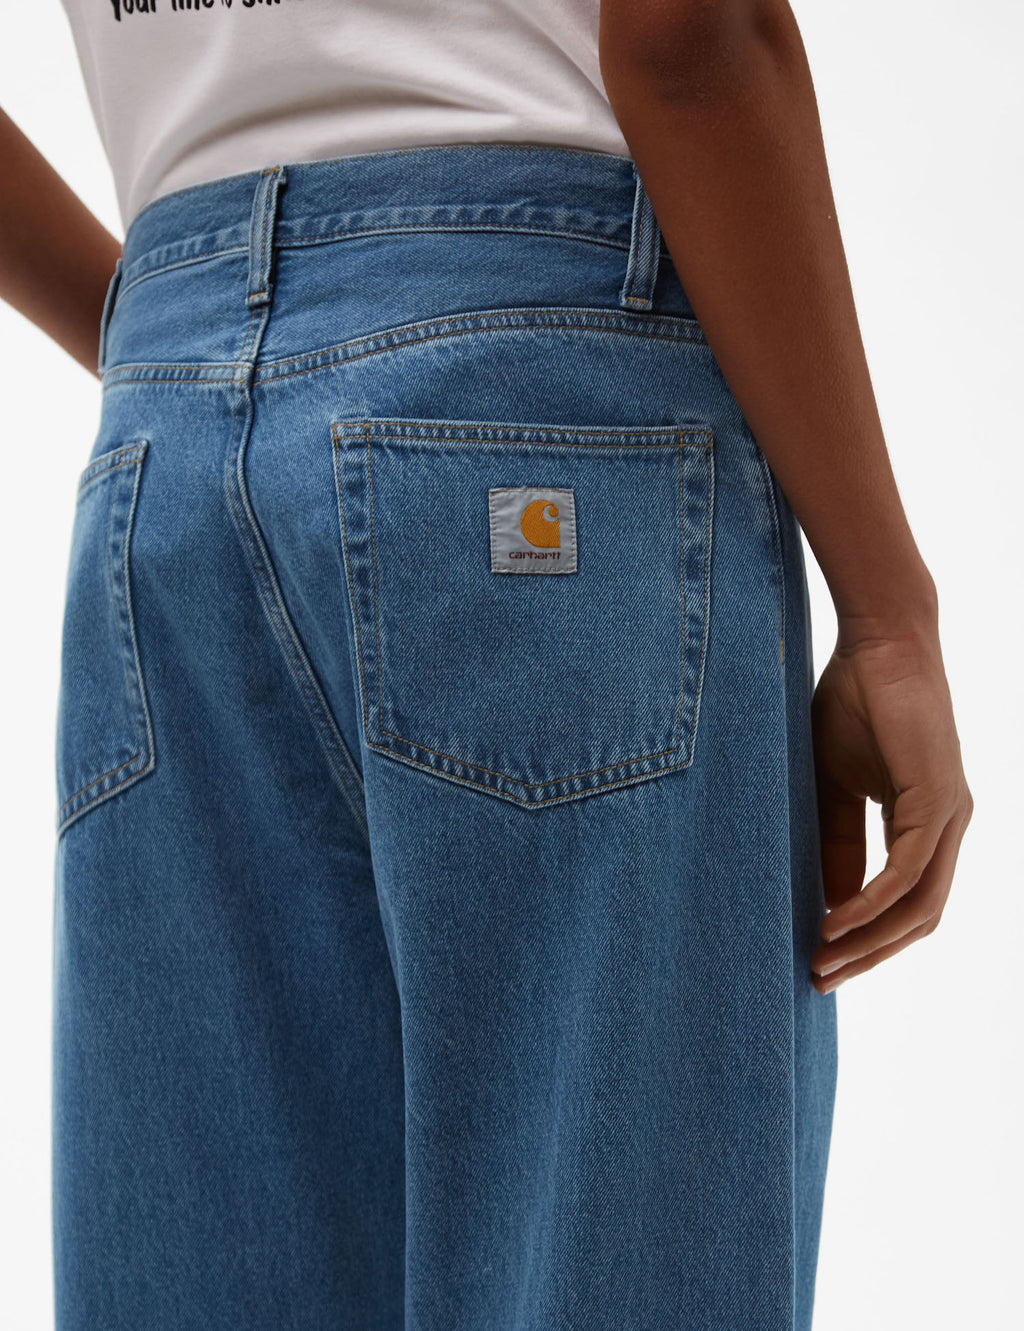 Carhartt-WIP Landon Pant (Losse) - Blue Stone Washed I Urban Excess. –  URBAN EXCESS